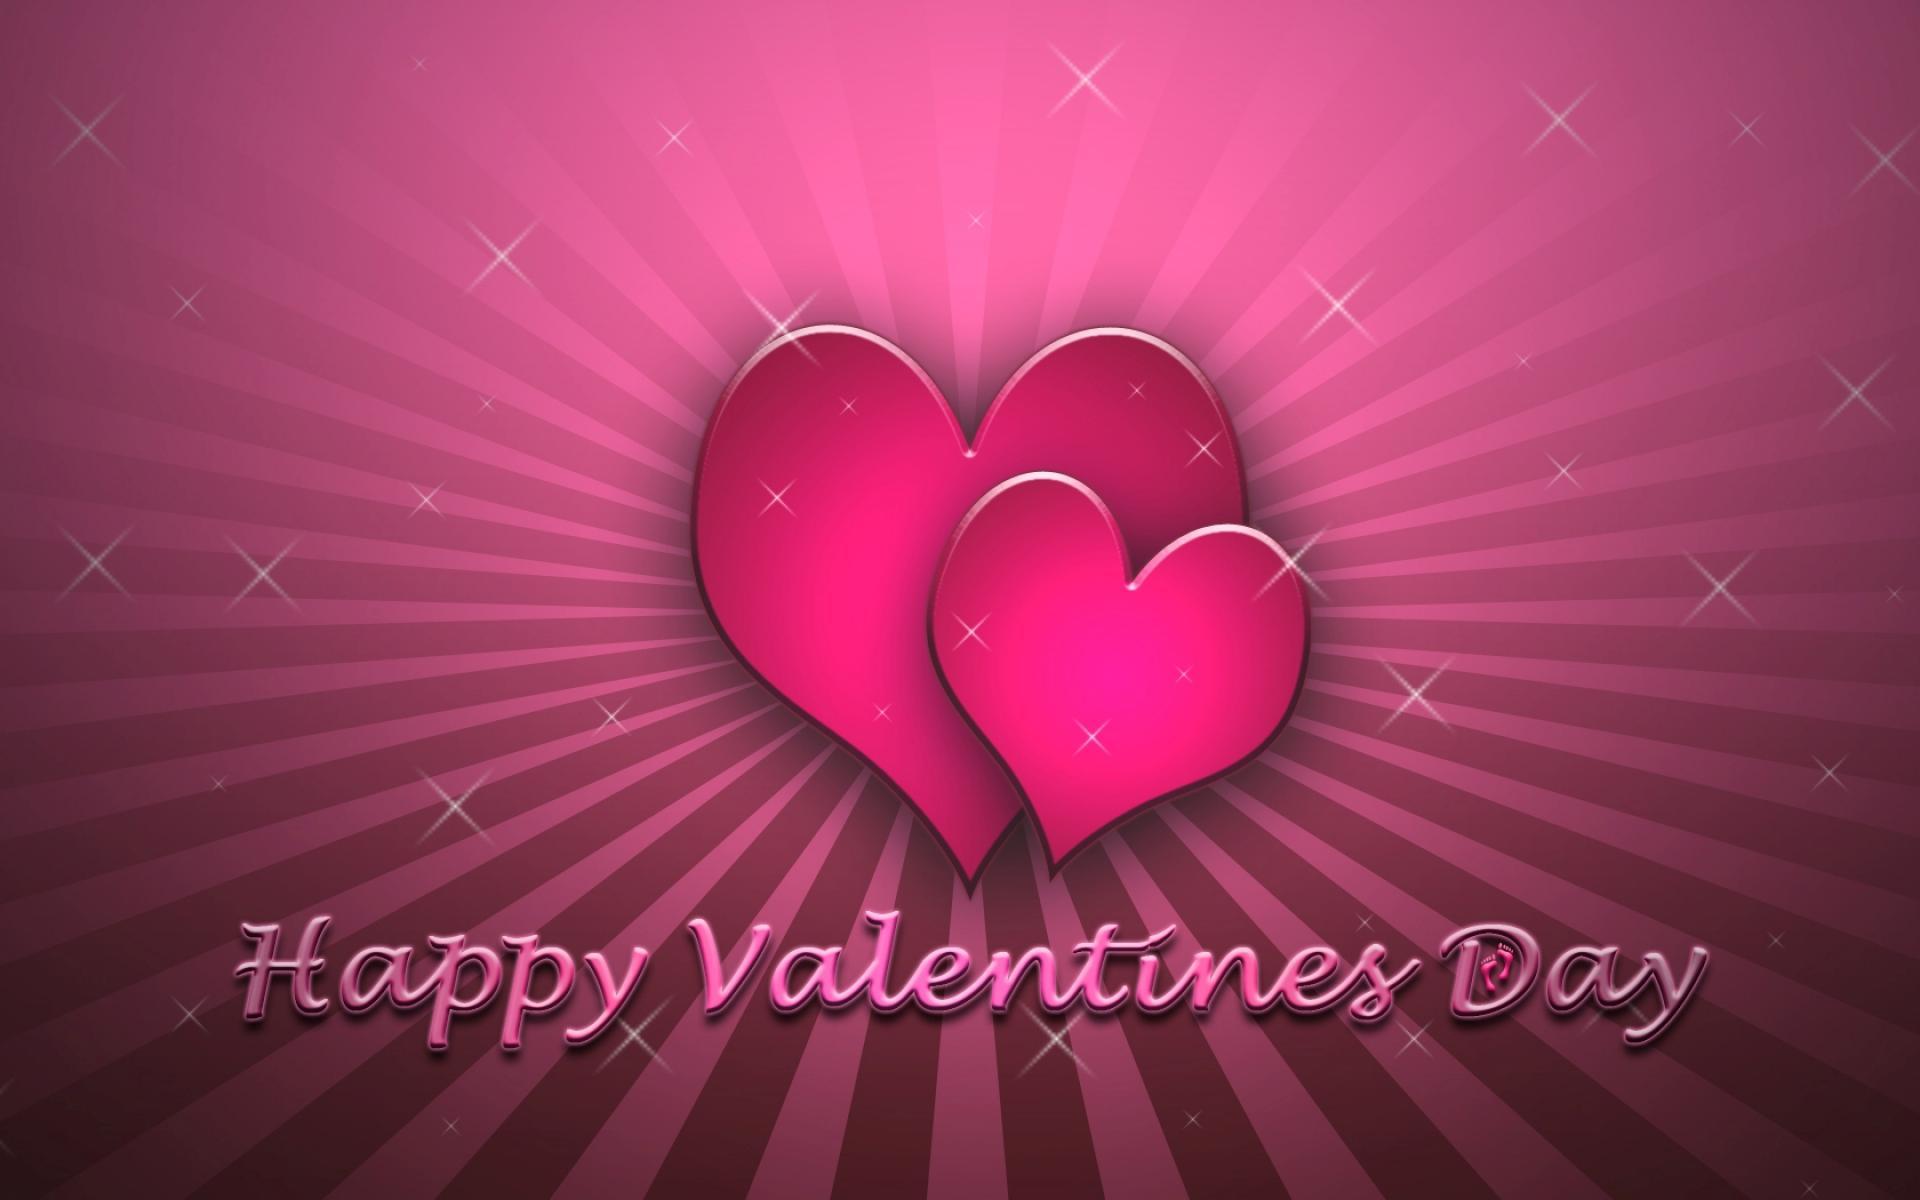 21 Hd Valentine S Day Wallpapers | HD Wallpapers Range